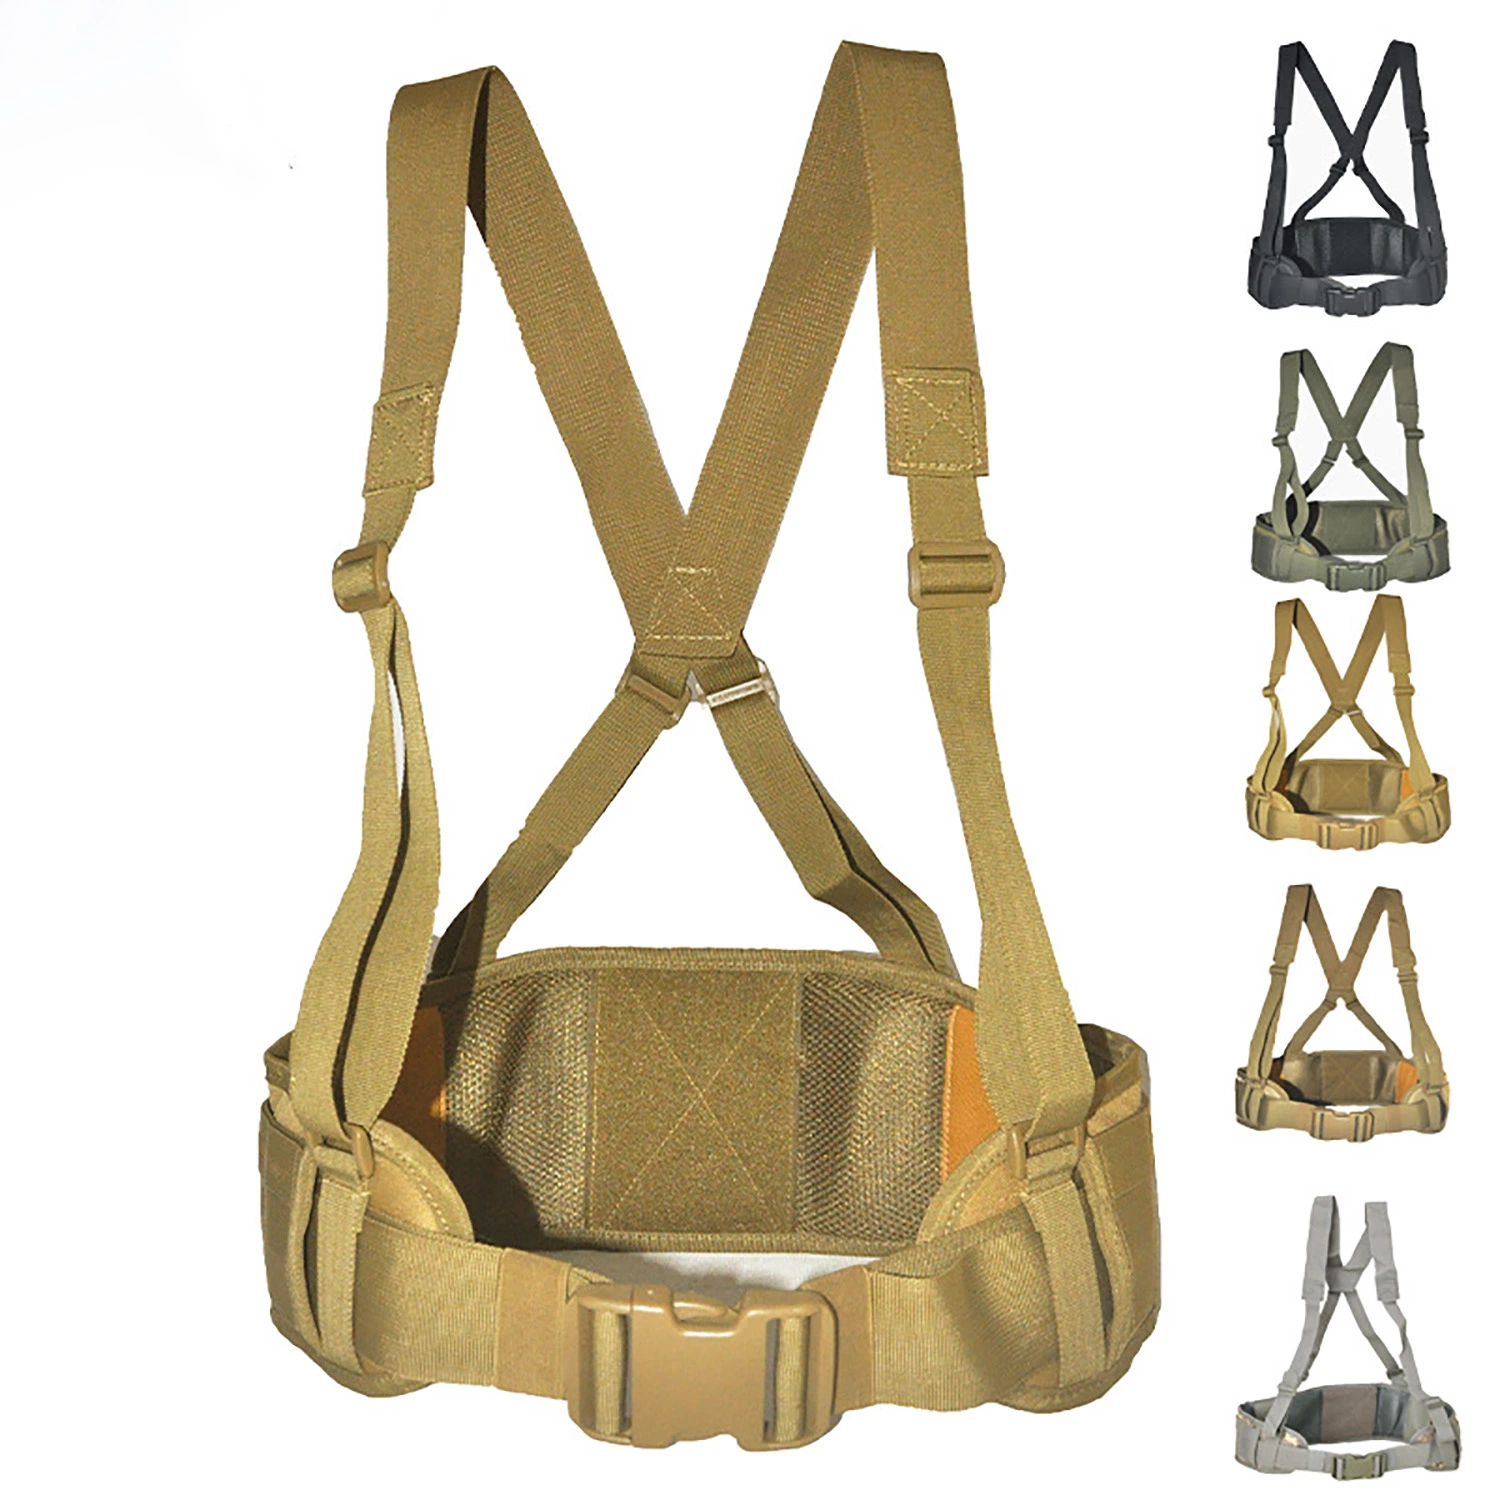 Adjustable Suspenders Free Straps Airsoft Padded Equipment Molle Waist Belt Ai23878